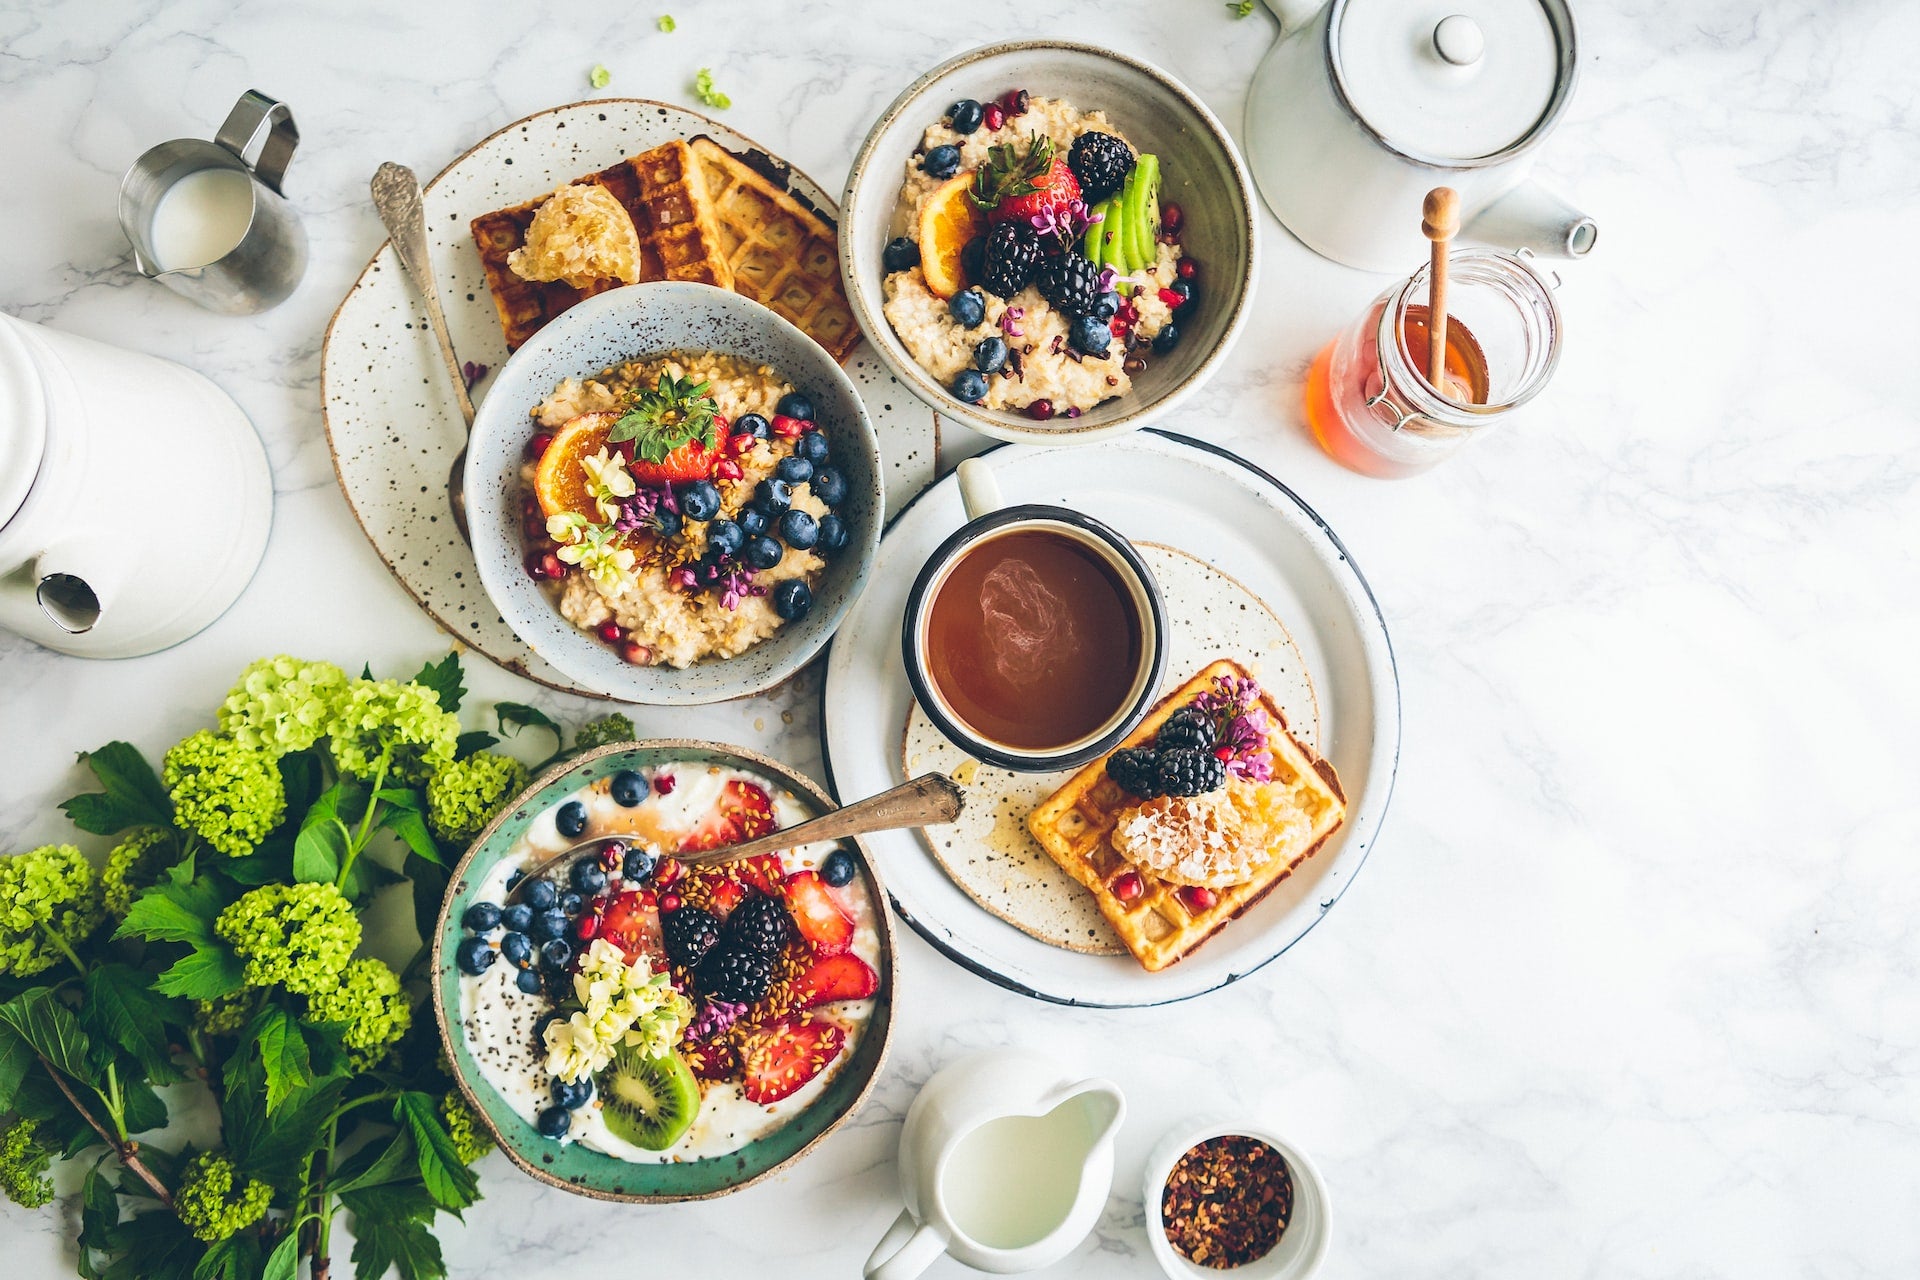 Several superfood breakfast dishes